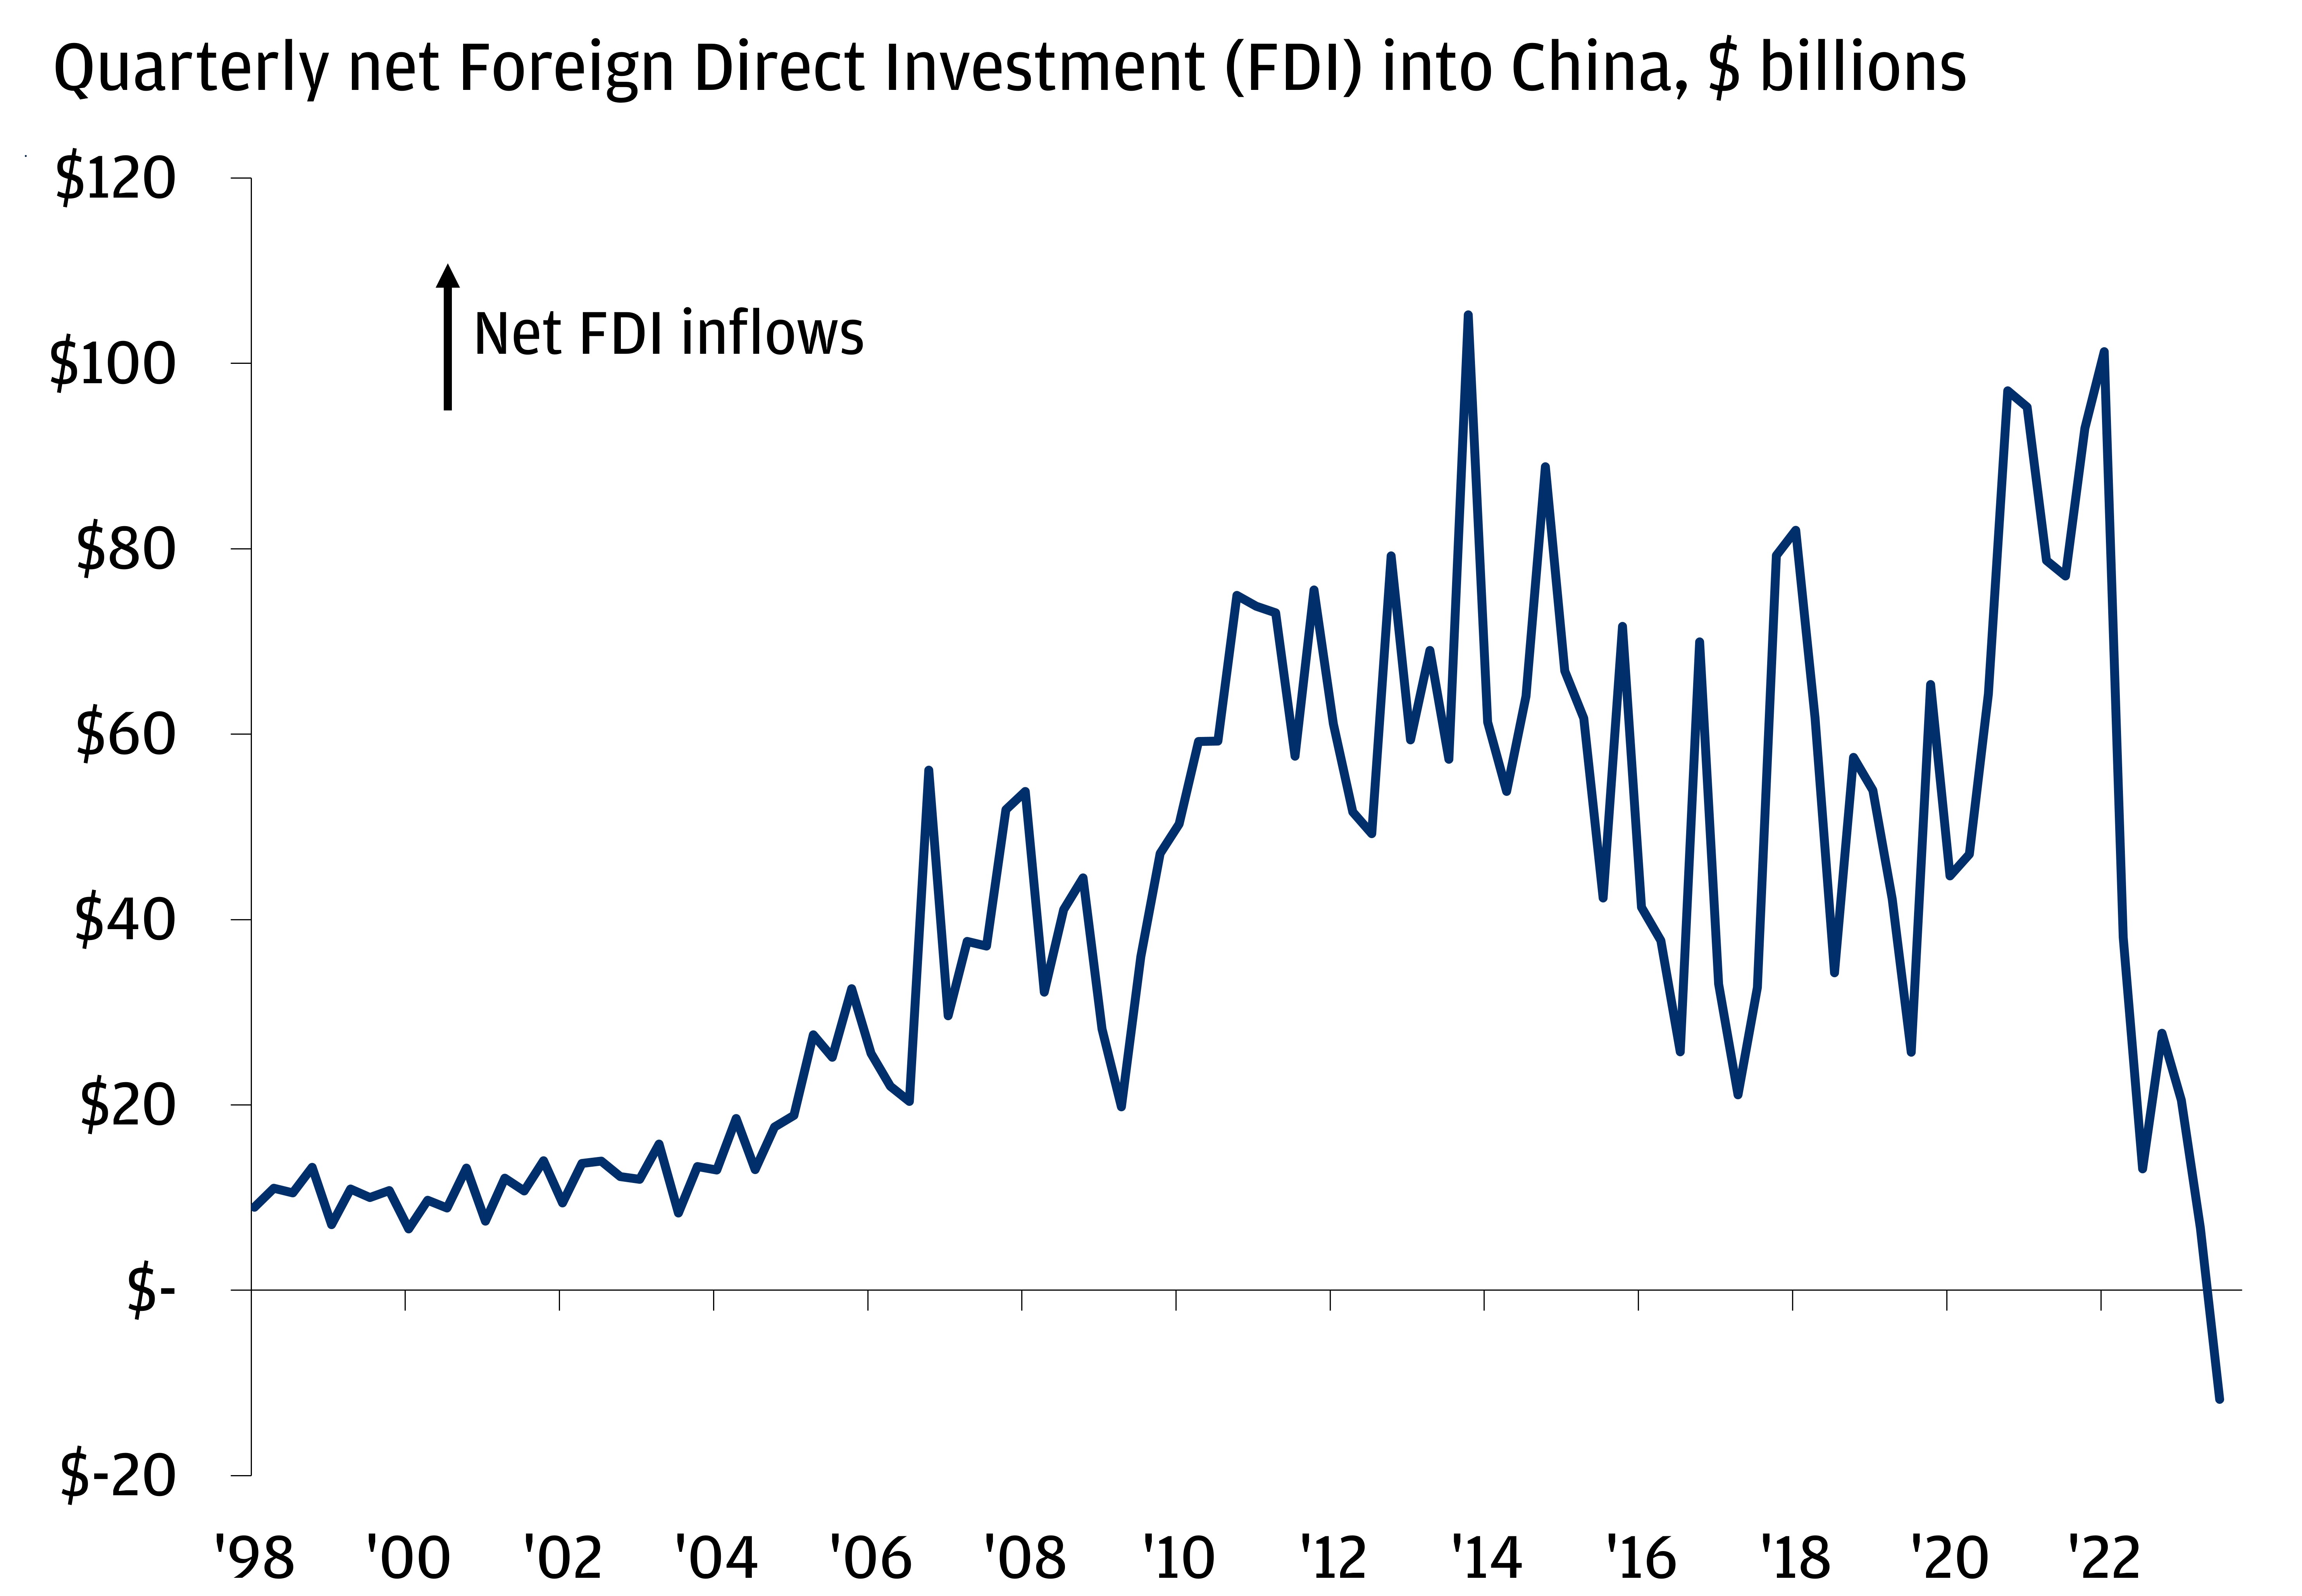 This chart shows the quarterly net foreign direct investment into China in billions of dollars.